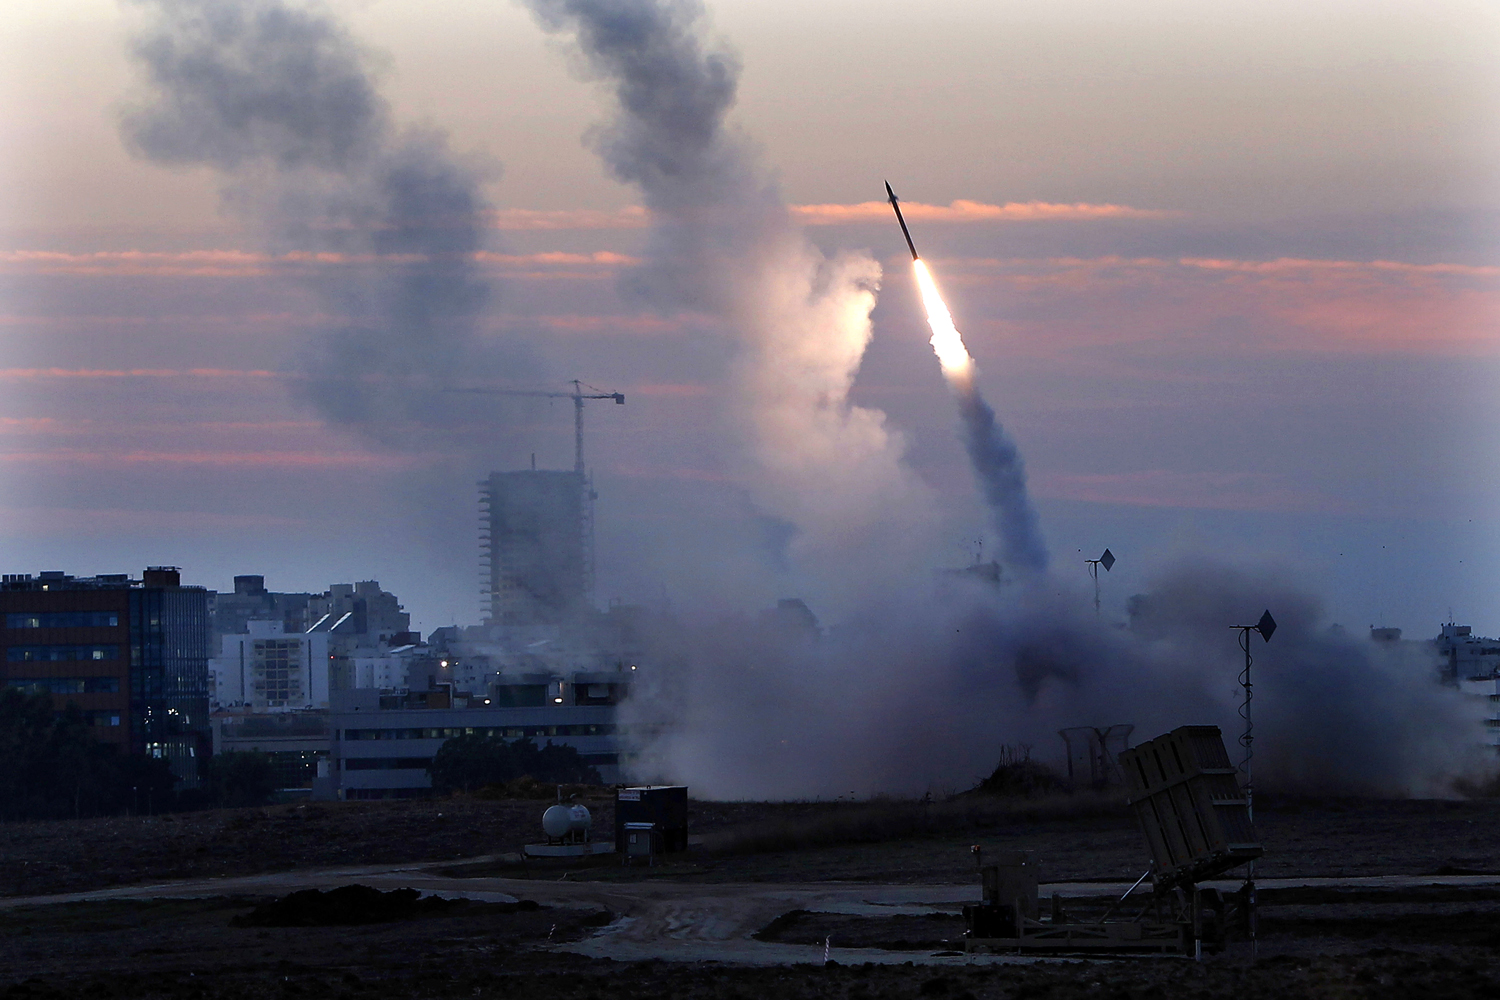 Image: Nov. 15, 2012. The Iron Dome defense system fires to intercept incoming missiles from Gaza in the port town of Ashdod.